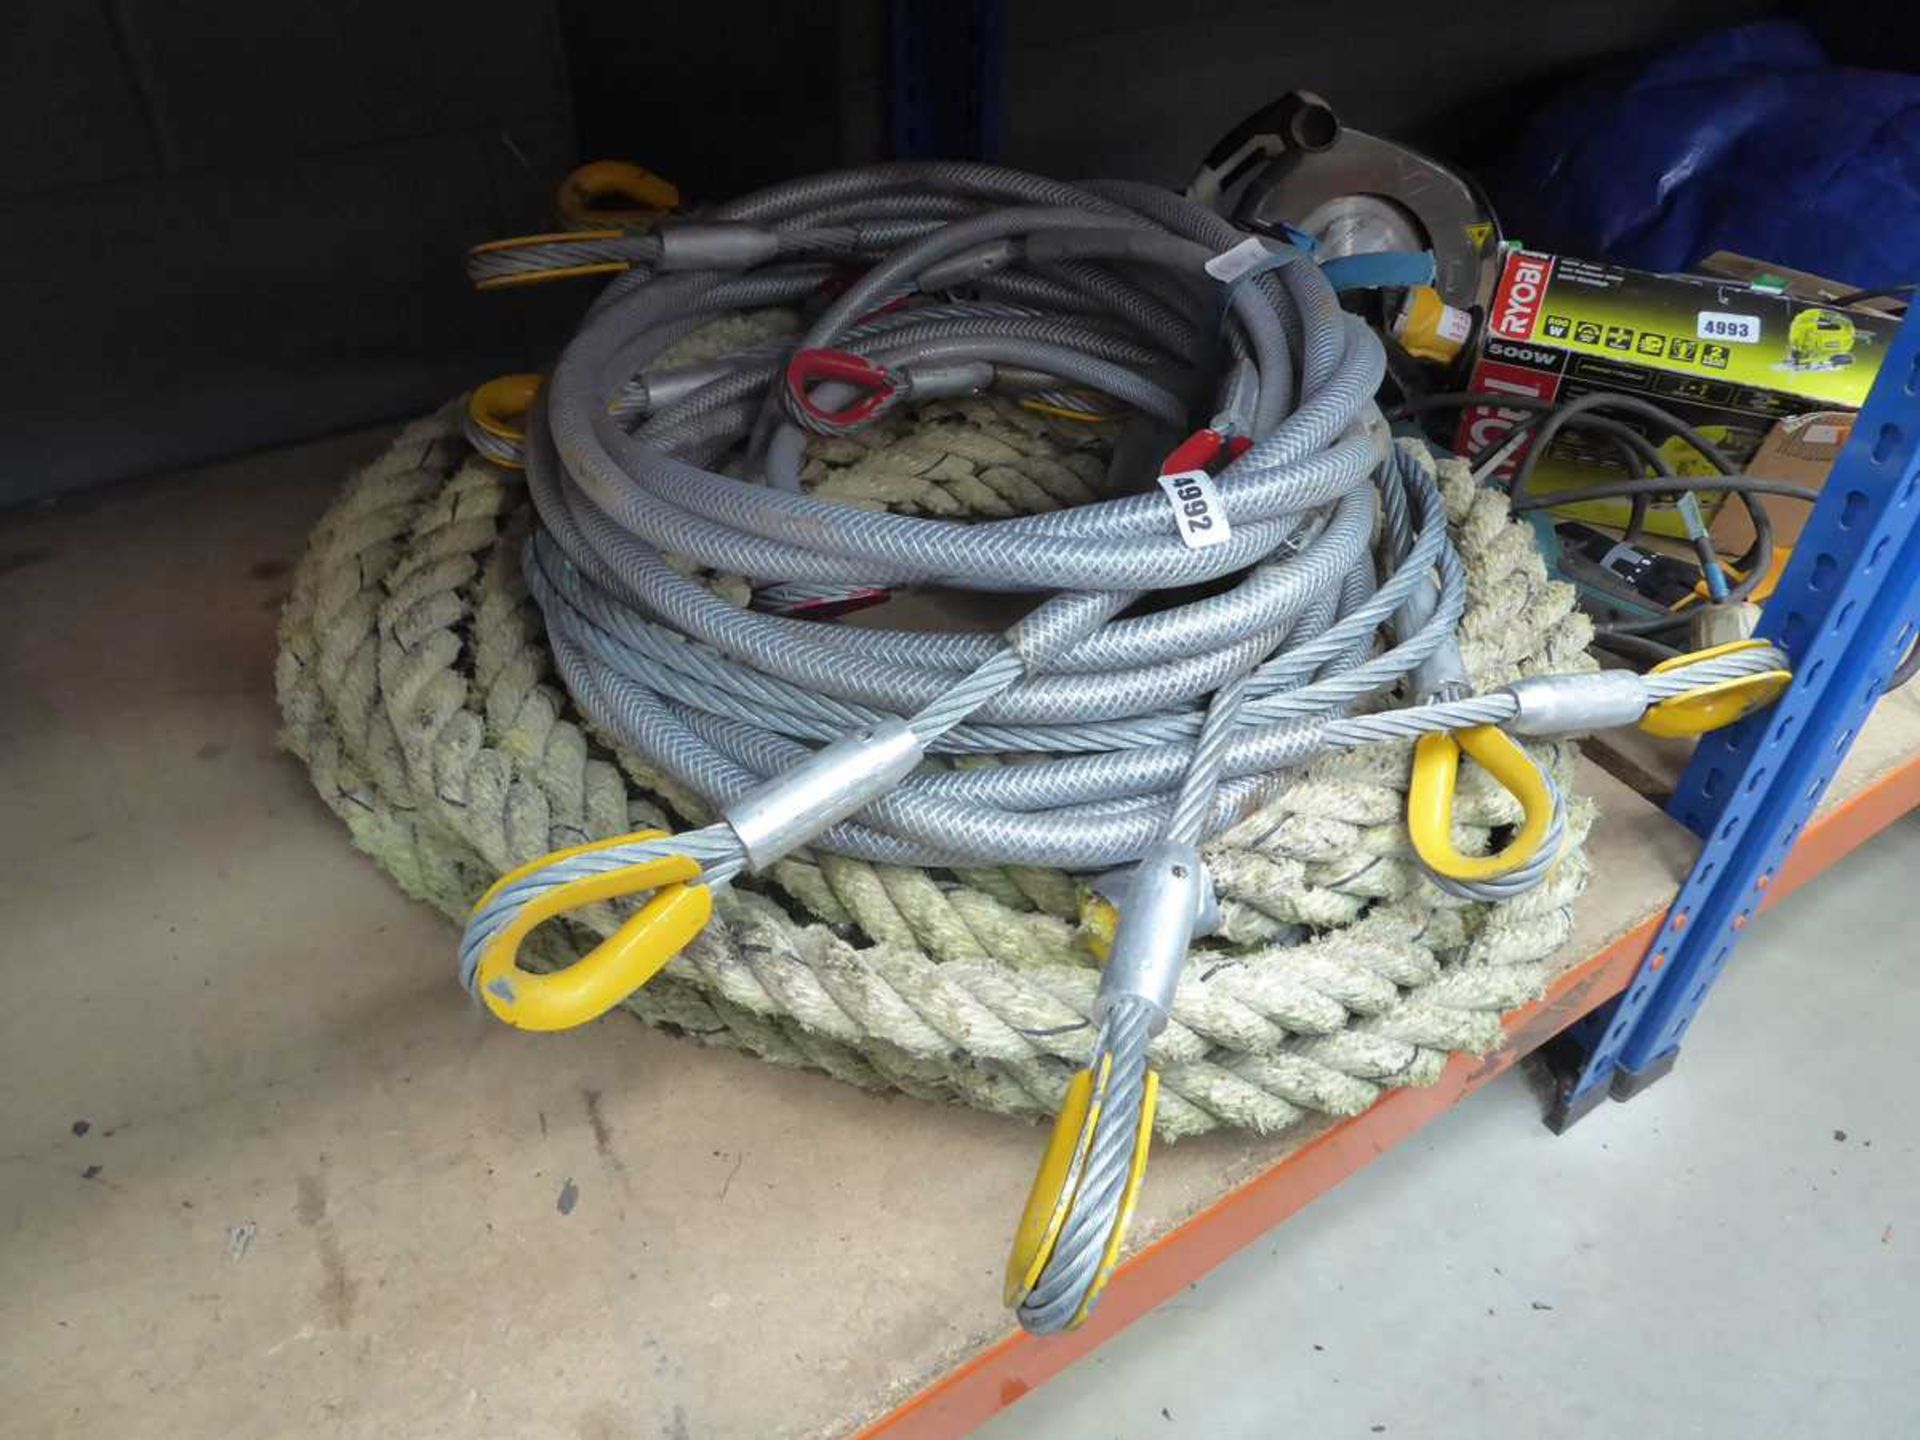 Heavy duty rope and plastic covered wire straps